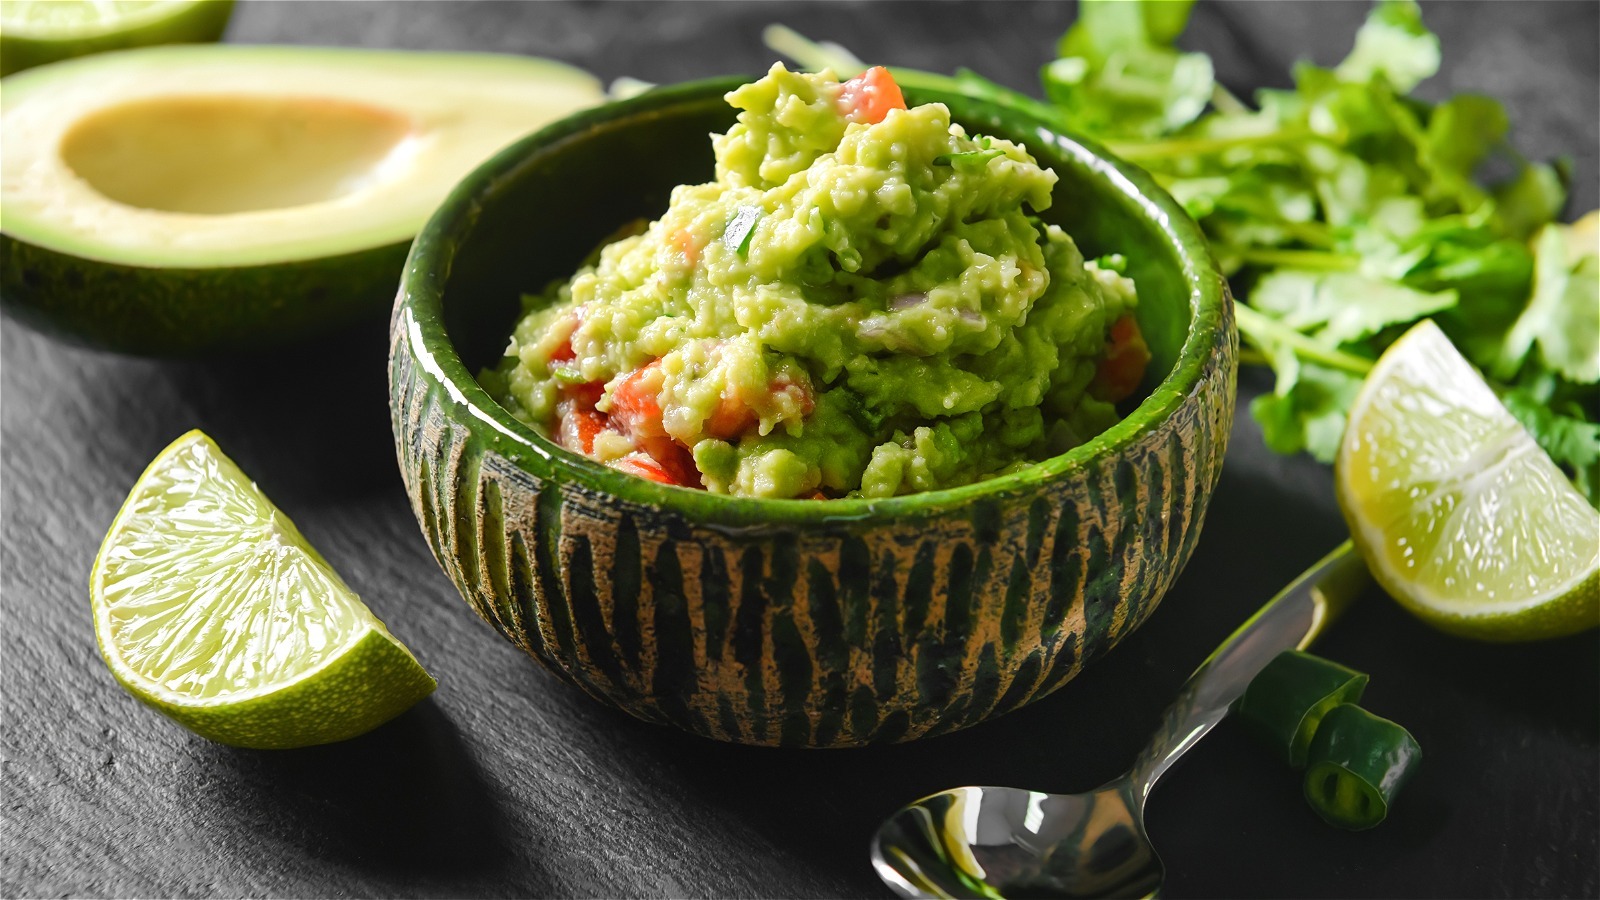 How to Make Guacamole with One Avocado » the practical kitchen